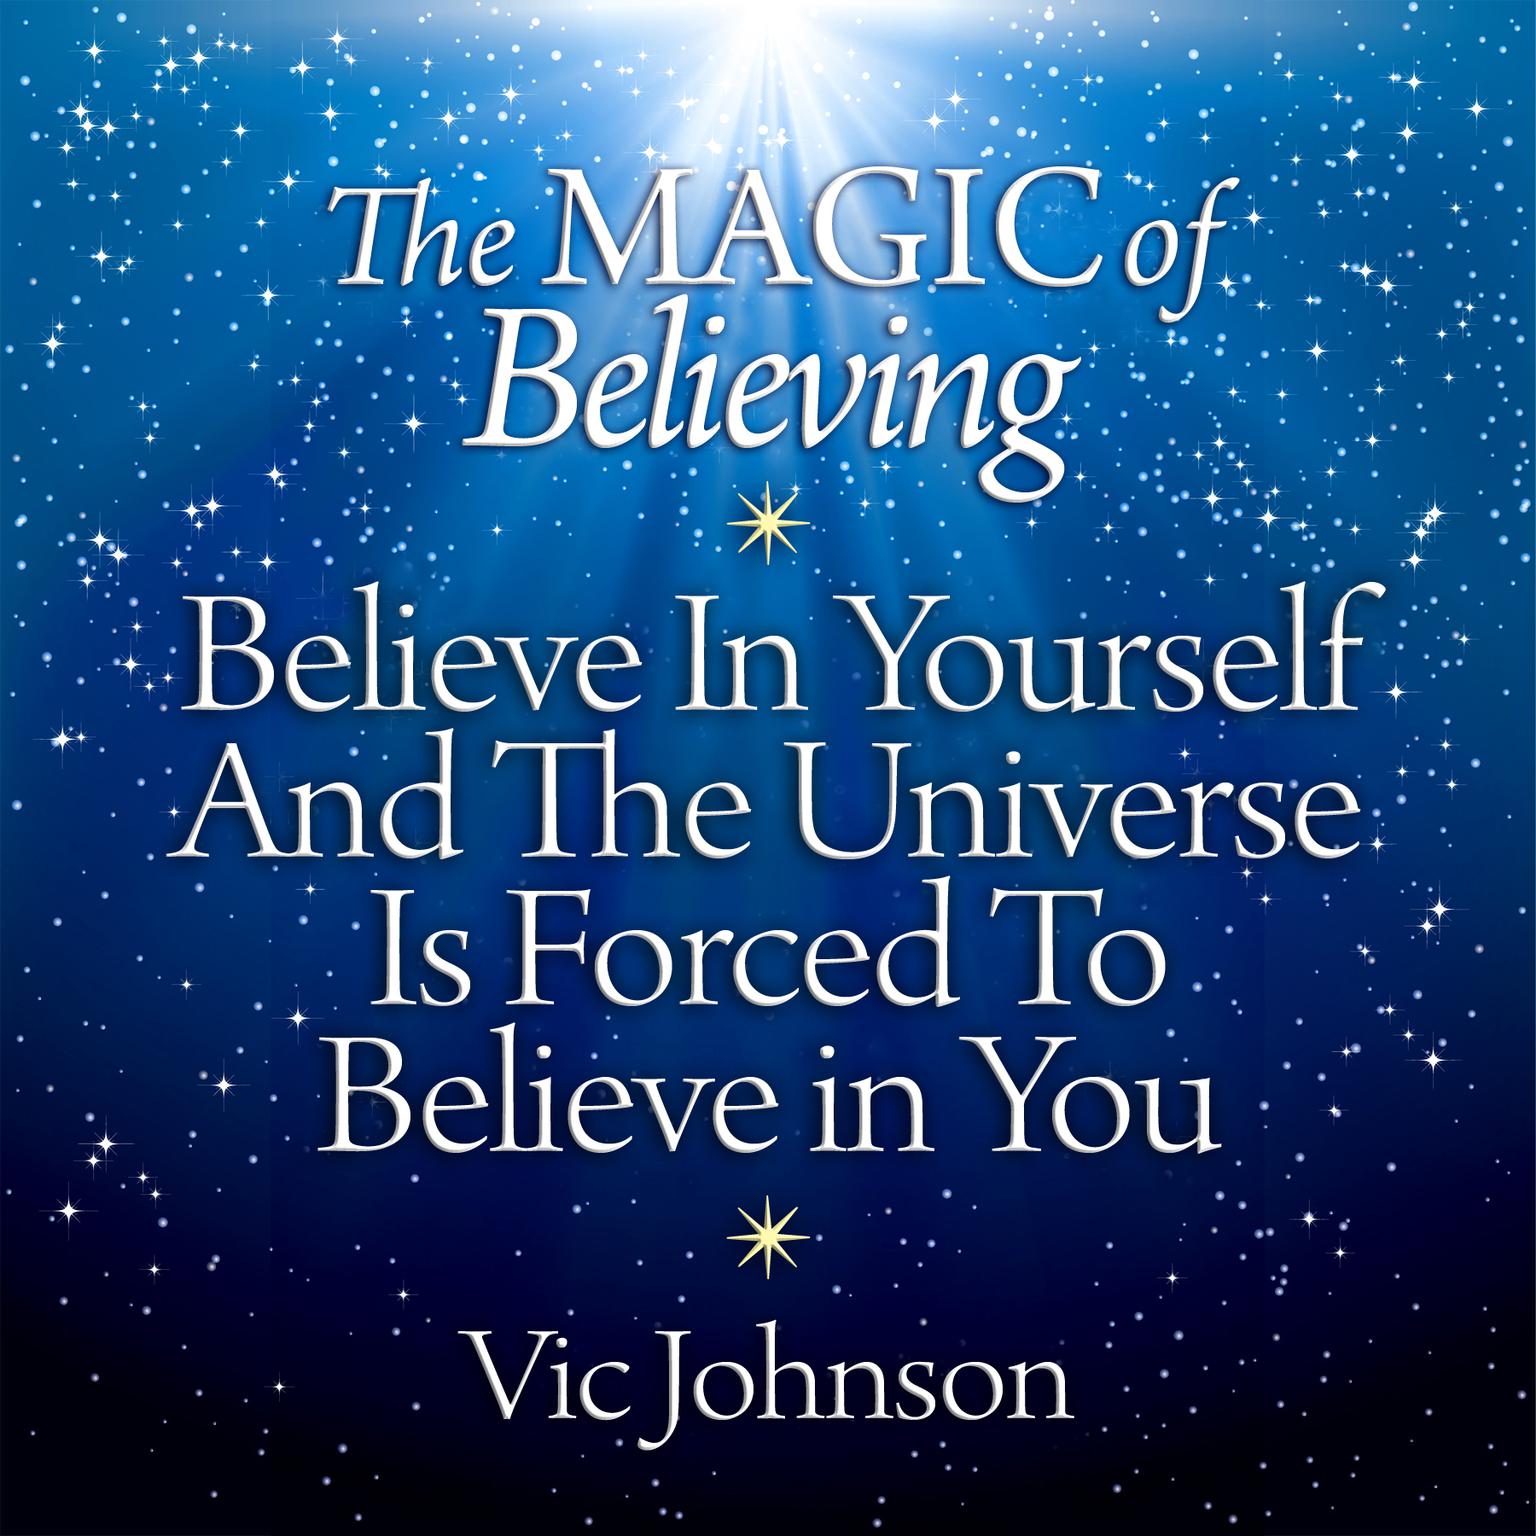 The Magic of Believing: Believe in Yourself and the Universe Is Forced to Believe in You Audiobook, by Vic Johnson